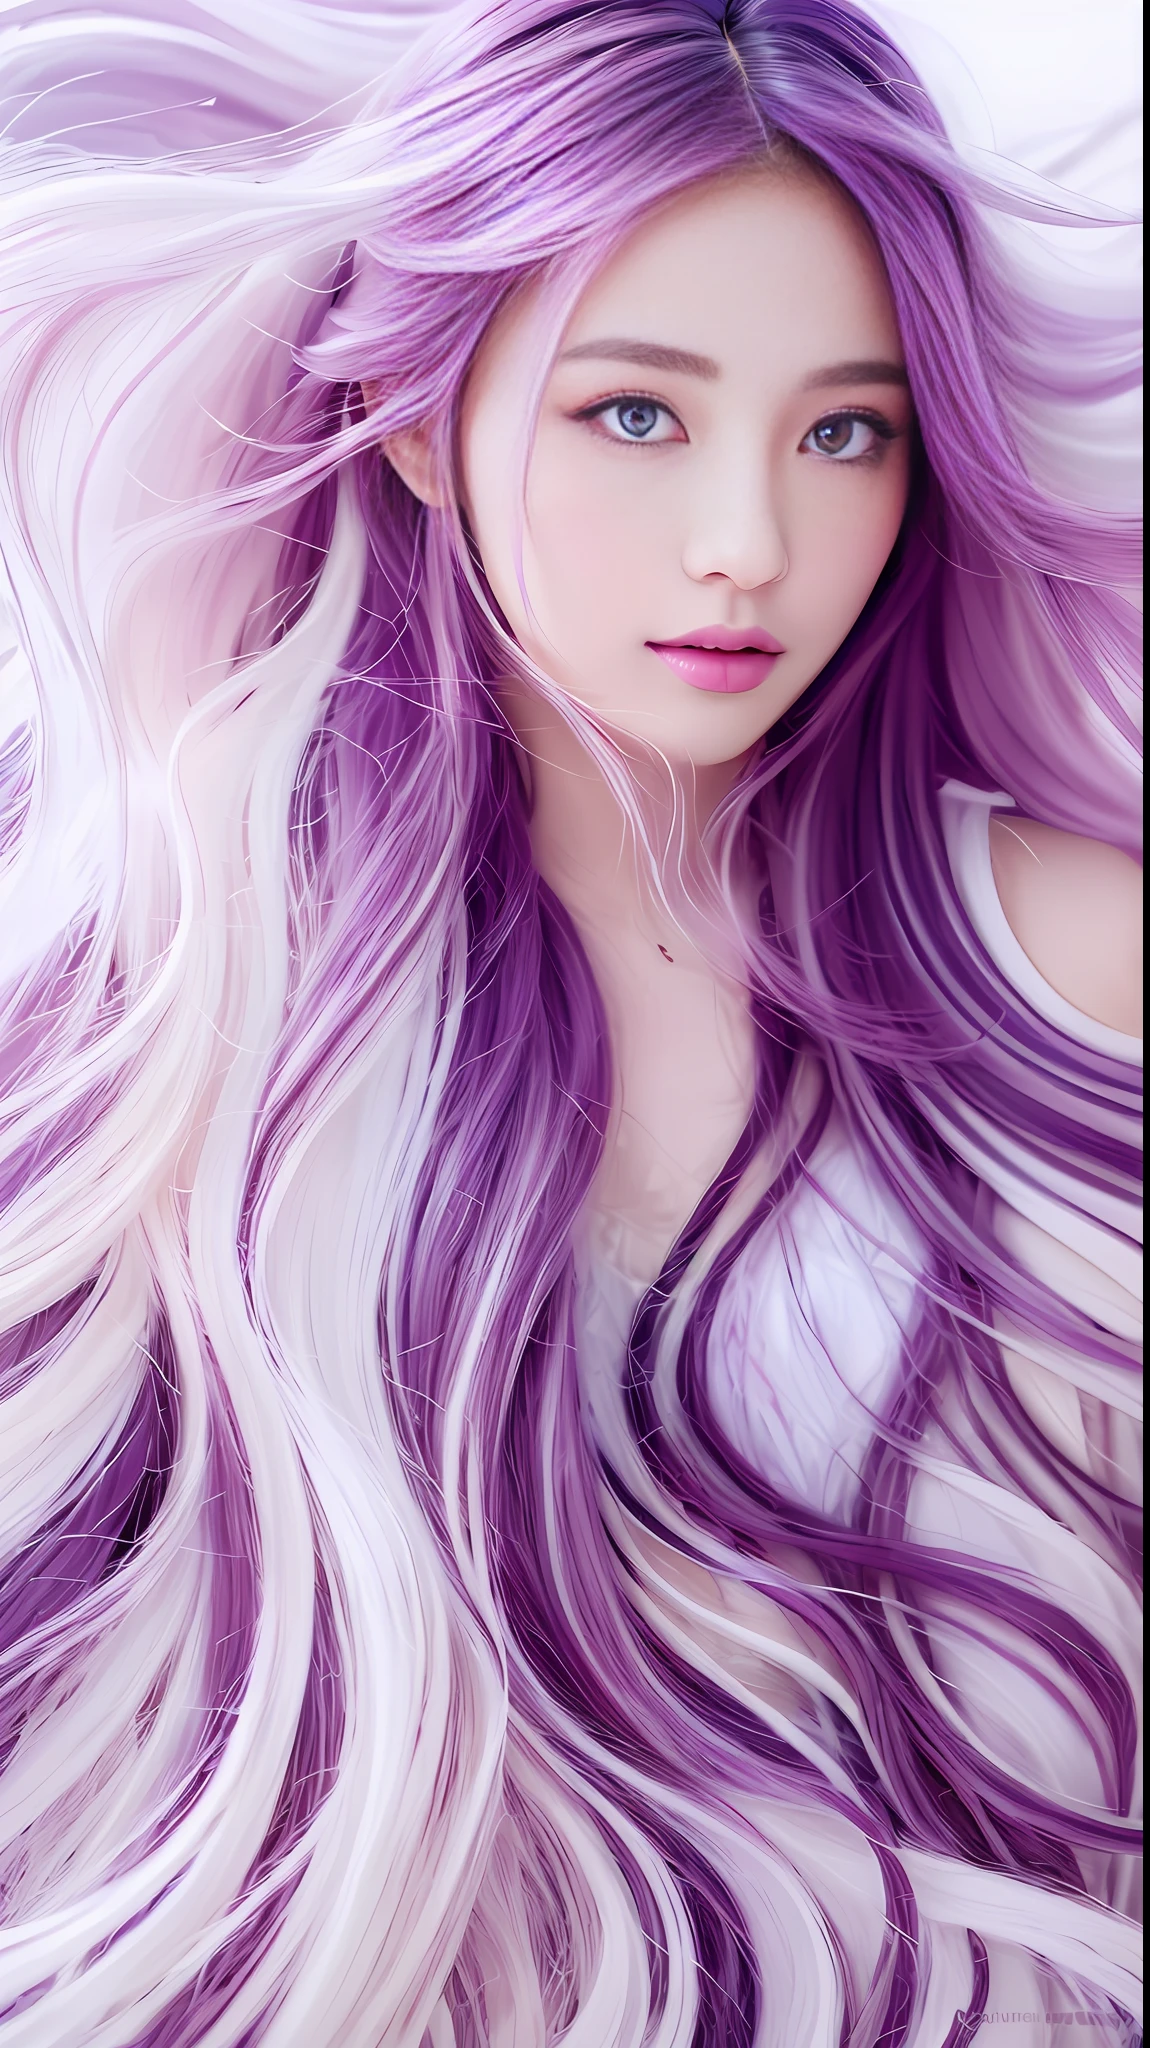 (((The Masterpiece))), best qulity, Ultra-fine，Extremely detailed CG unity 8k wallpaper,best illustrations, A very delicate and beautiful picture,floating,high - resolution,dynamicangle,dynamicpose,(1girl with big breasts),Blue Eye,(Colorful hair+Silvery hair:1.3+red tinted hair:1.2+Purple hair+Yellow hair:1.3+Green hair:1.3),heavens,White clouds,Sunset,(WOW+Silver gloves), (L2 set+Strawberry bath towel),Deep forest, 

Prompt2:
			(((The Masterpiece))), best qulity,Ultra-fine，Extremely detailed CG unity 8k wallpaper,best illustrations,A very delicate and beautiful picture,floating,high - resolution,dynamicangle,dynamicpose,(1girl with big breasts),Blue Eye,(Colorful hair+Silvery hair:1.3+red tinted hair:1.2+Purple hair+Yellow hair:1.3+Green hair:1.3),heavens,White clouds,Sunset,(WOW+Ser silver breastplate), (L2 set+Strawberry bath towel),Deep forest，

Prompt3:
			(Indochina style, Parlor，Oak or walnut) --auto